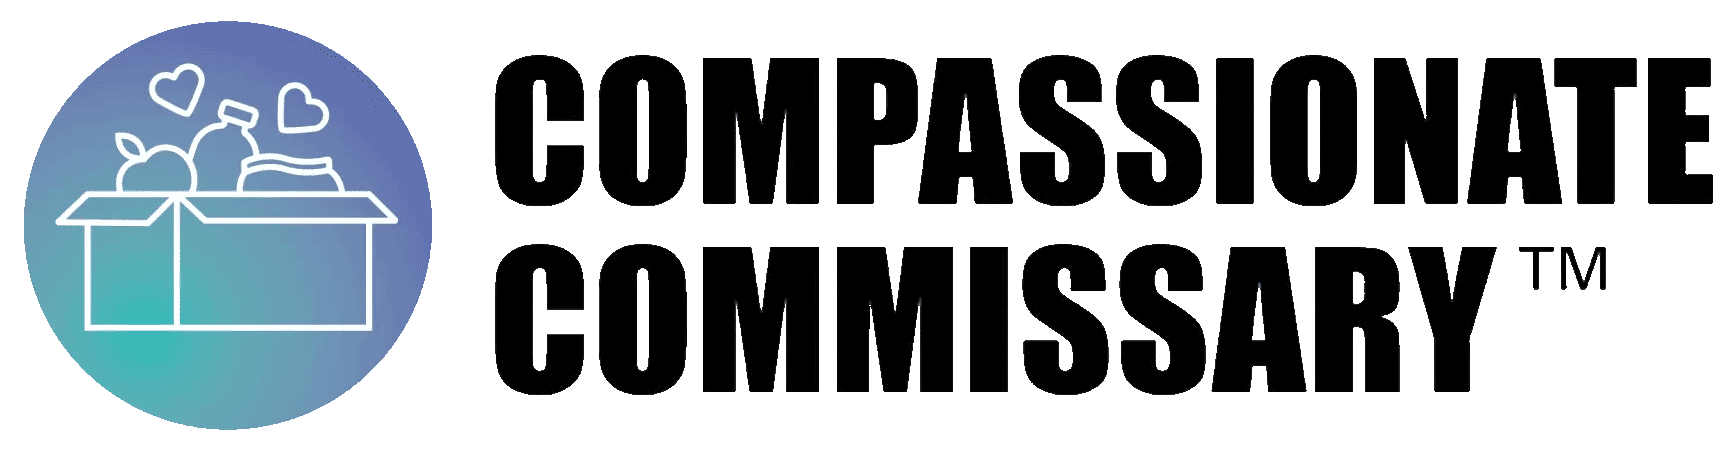 A logo for compassionate commissary tm with a box and hearts in a circle.